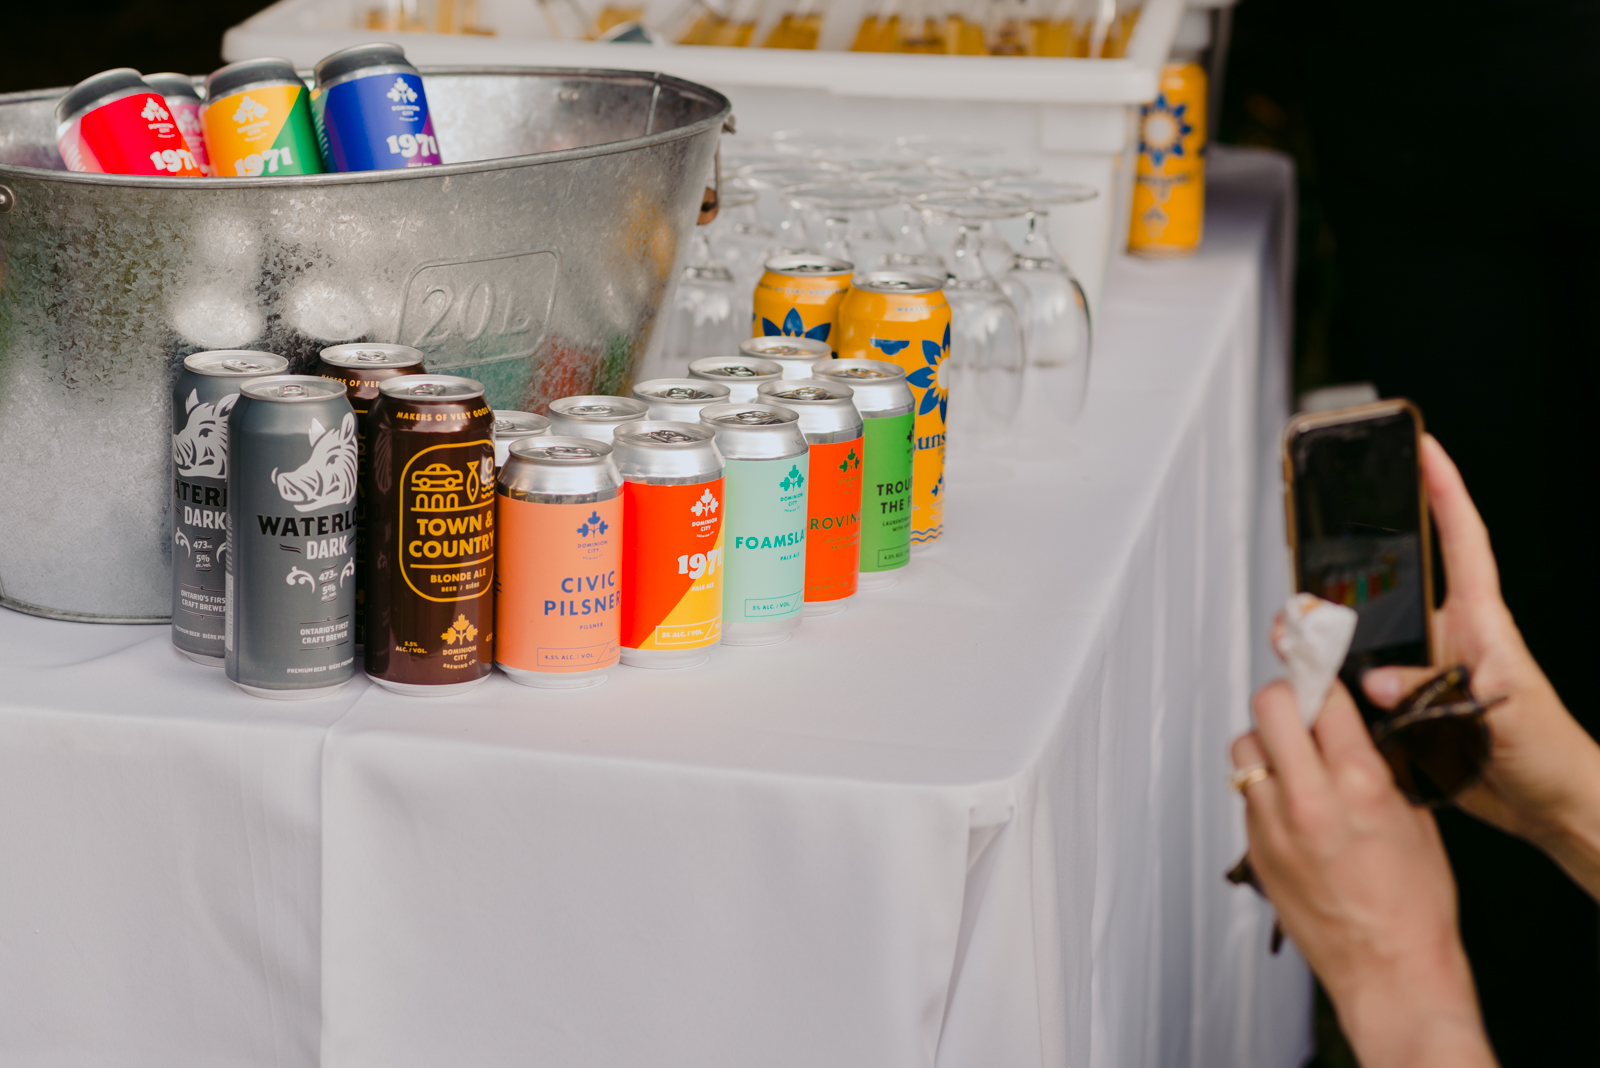 wedding guest taking a photo of the lineup of Dominion City beer cans at cocktail hour